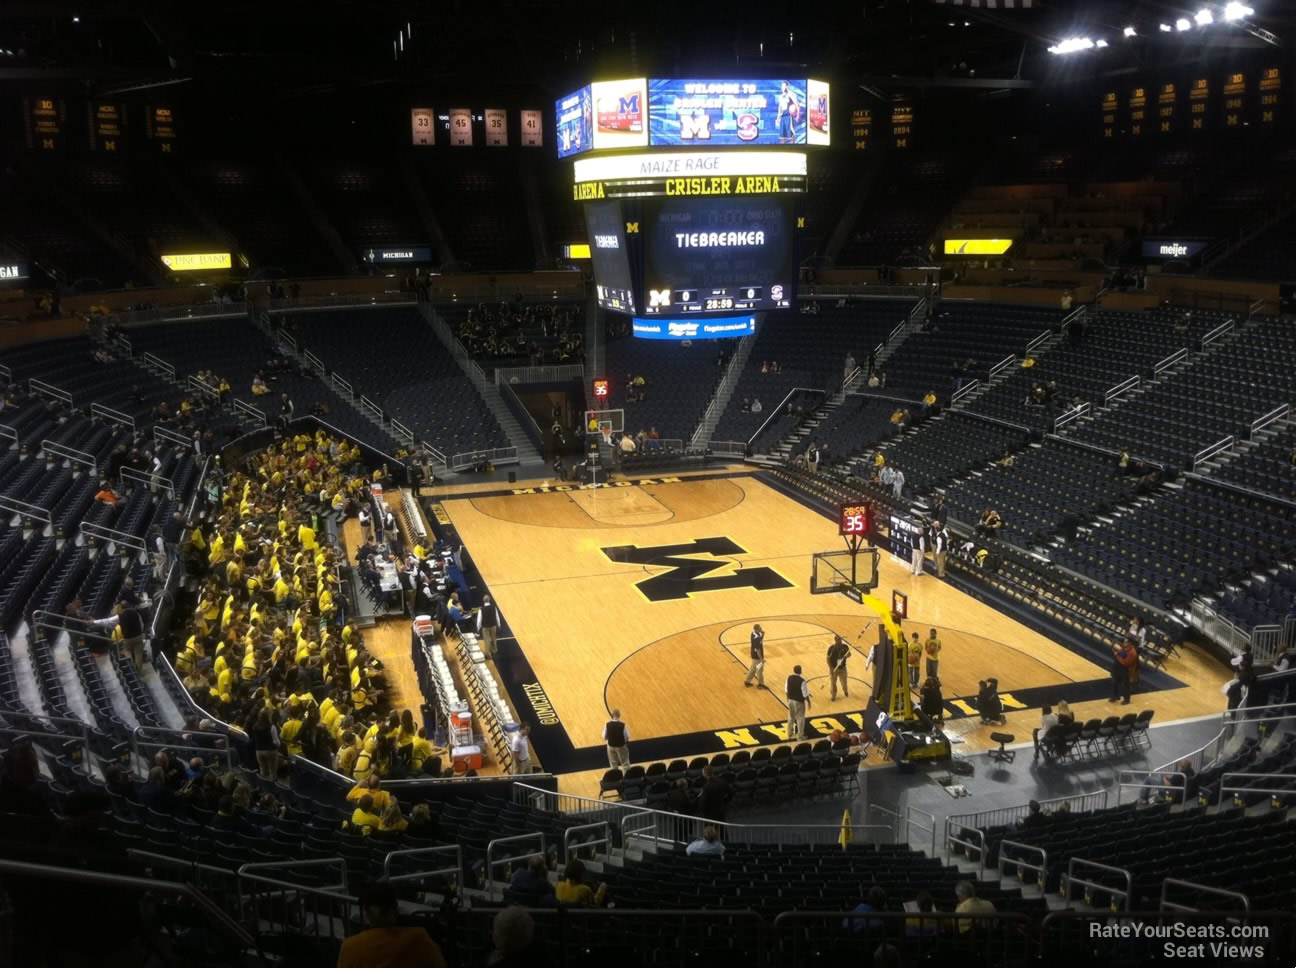 section 216, row 38 seat view  - crisler center